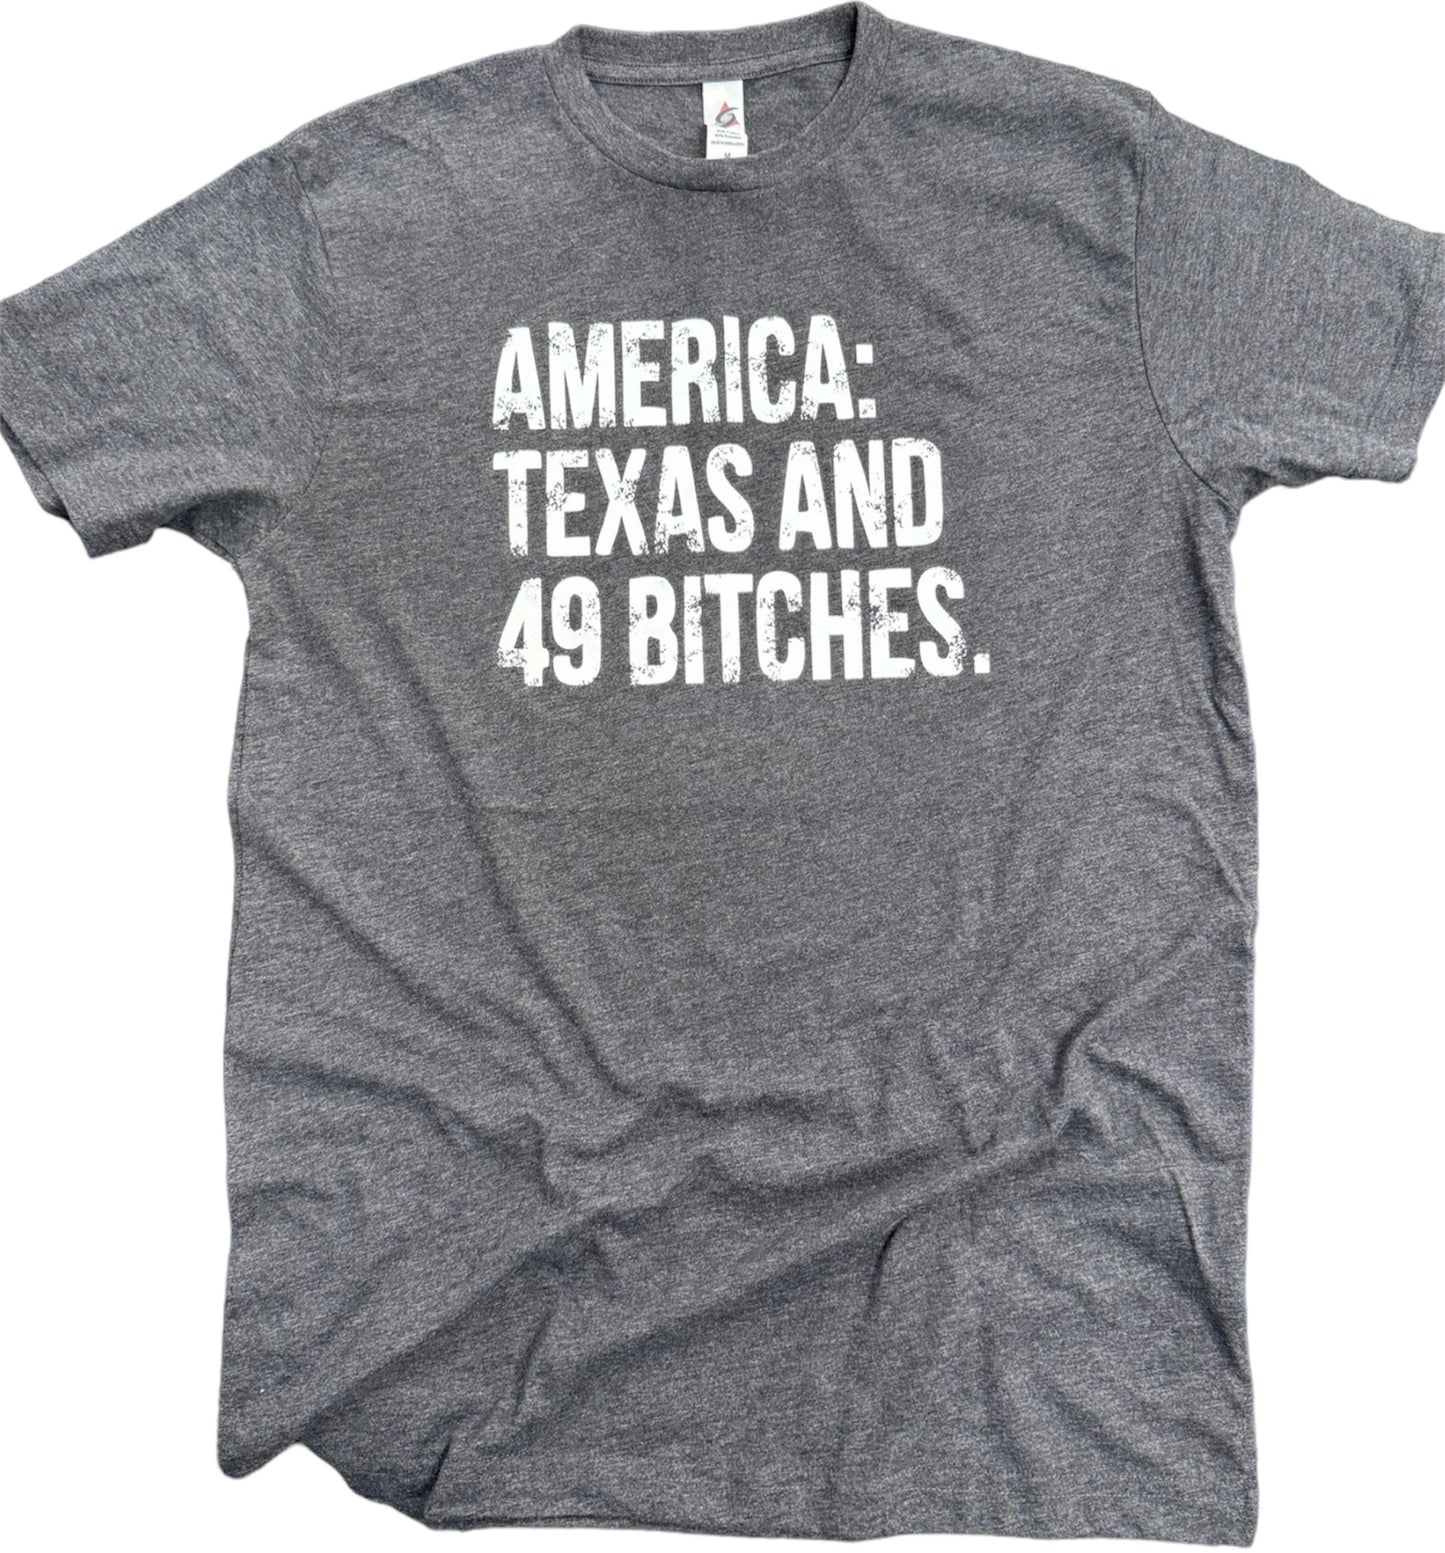 America: Texas and 49 bitches